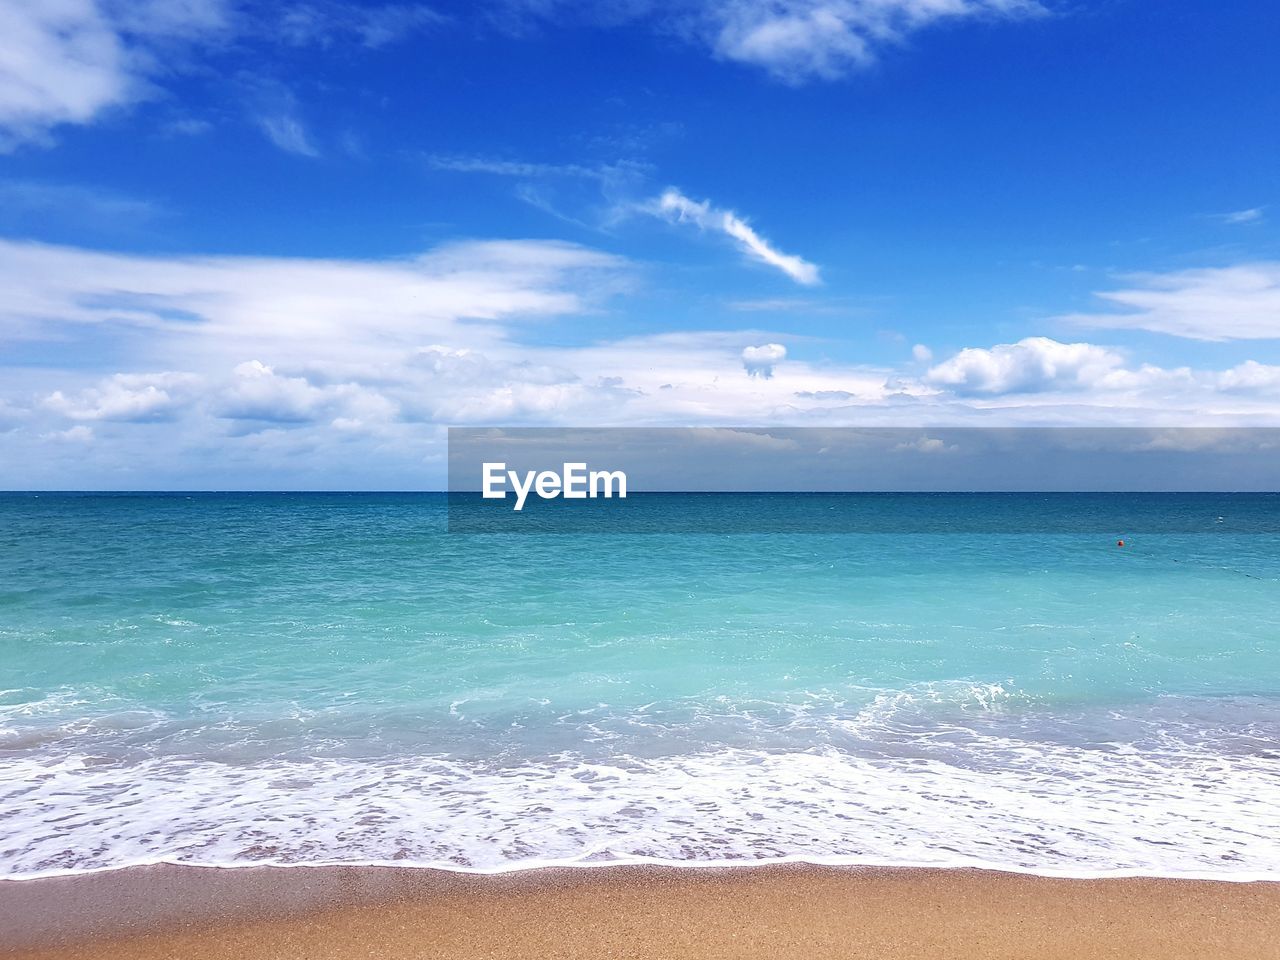 SCENIC VIEW OF BEACH AGAINST SKY